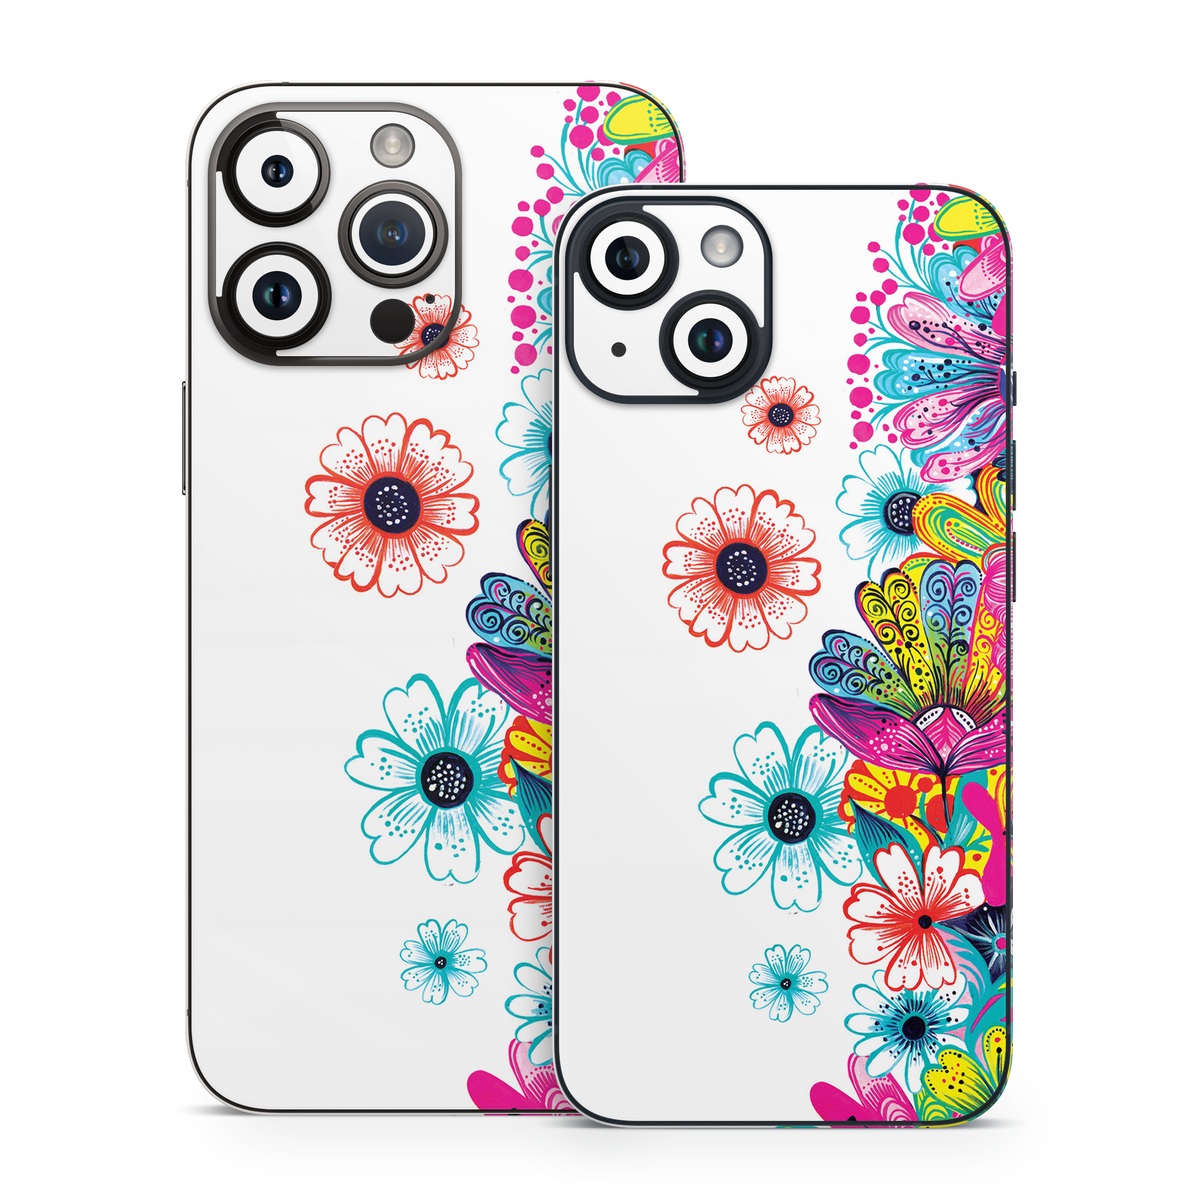 iPhone 14 Skin design of Pattern, Floral design, Design, Graphic design, Flower, Wildflower, Plant, Graphics, Clip art, Visual arts, with white, pink, blue, yellow, purple, red colors